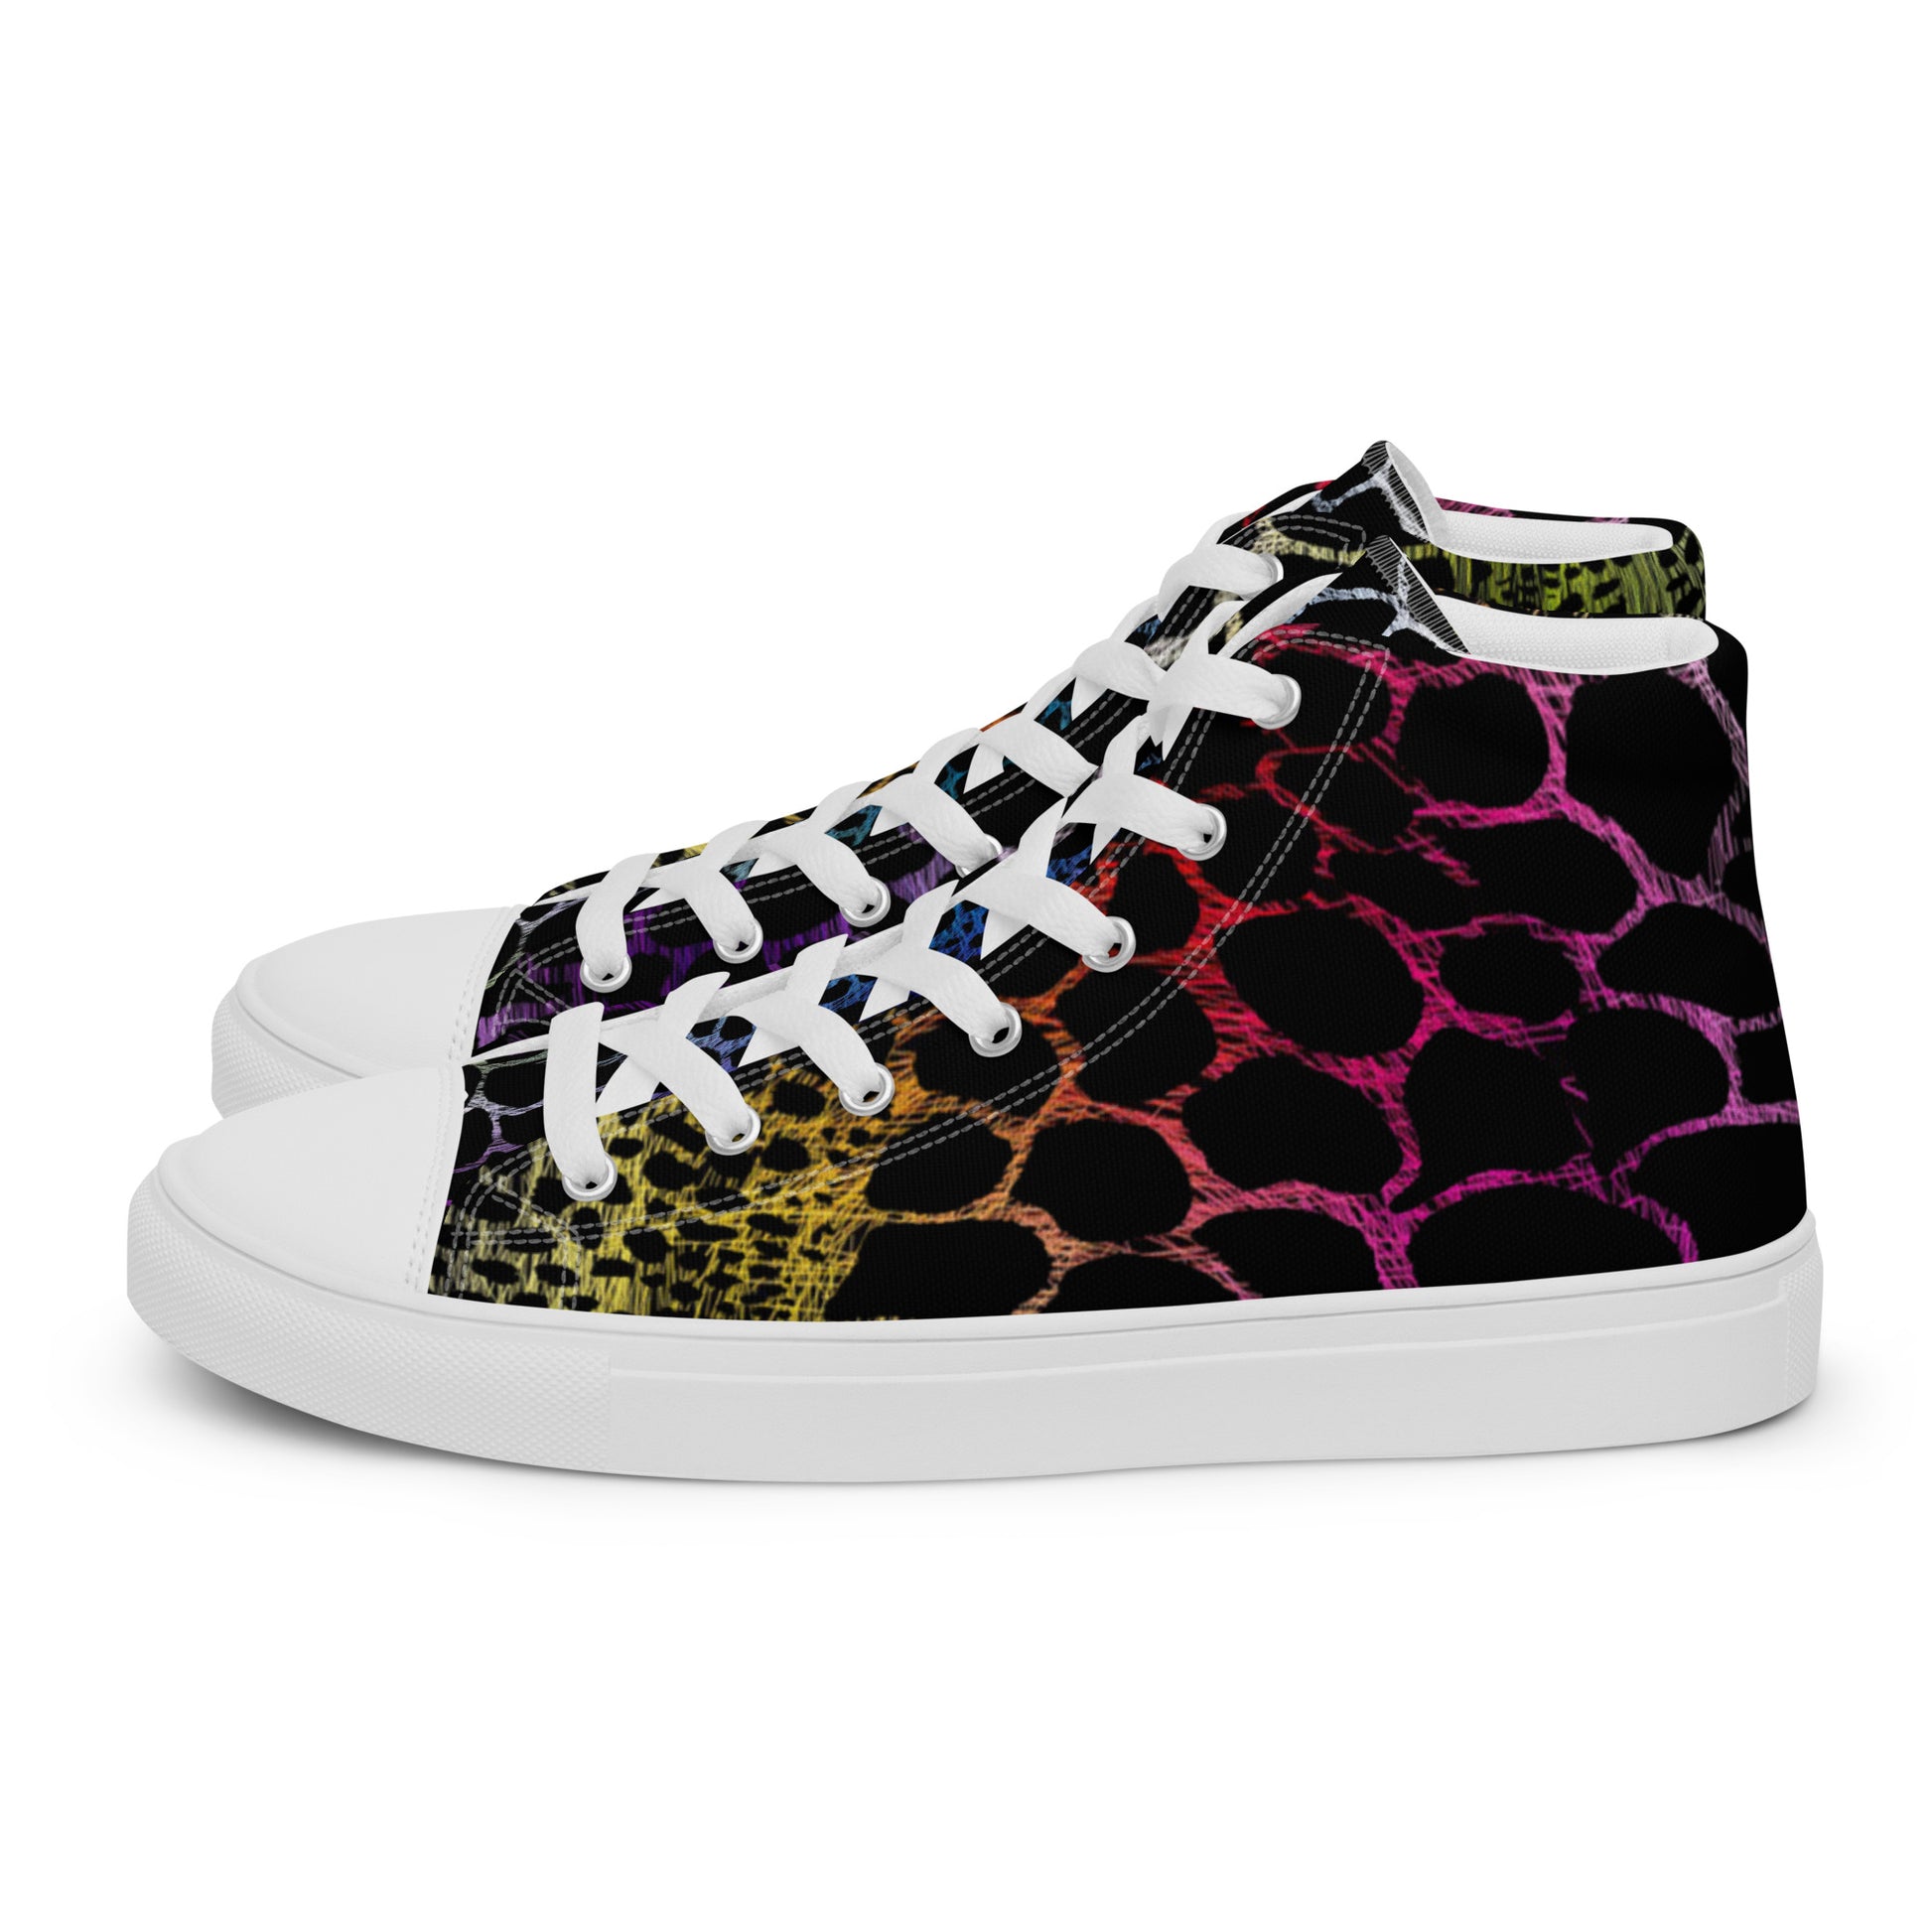 Wild Rainbow Outline Women’s High Top Canvas Shoes | Casual Print Shoes | Stylish Festival Sneakers | LGBTQ+ Shoes | Lace Up Sneakers | - Comfortable Culture - 5 - Shoes - Comfortable Culture